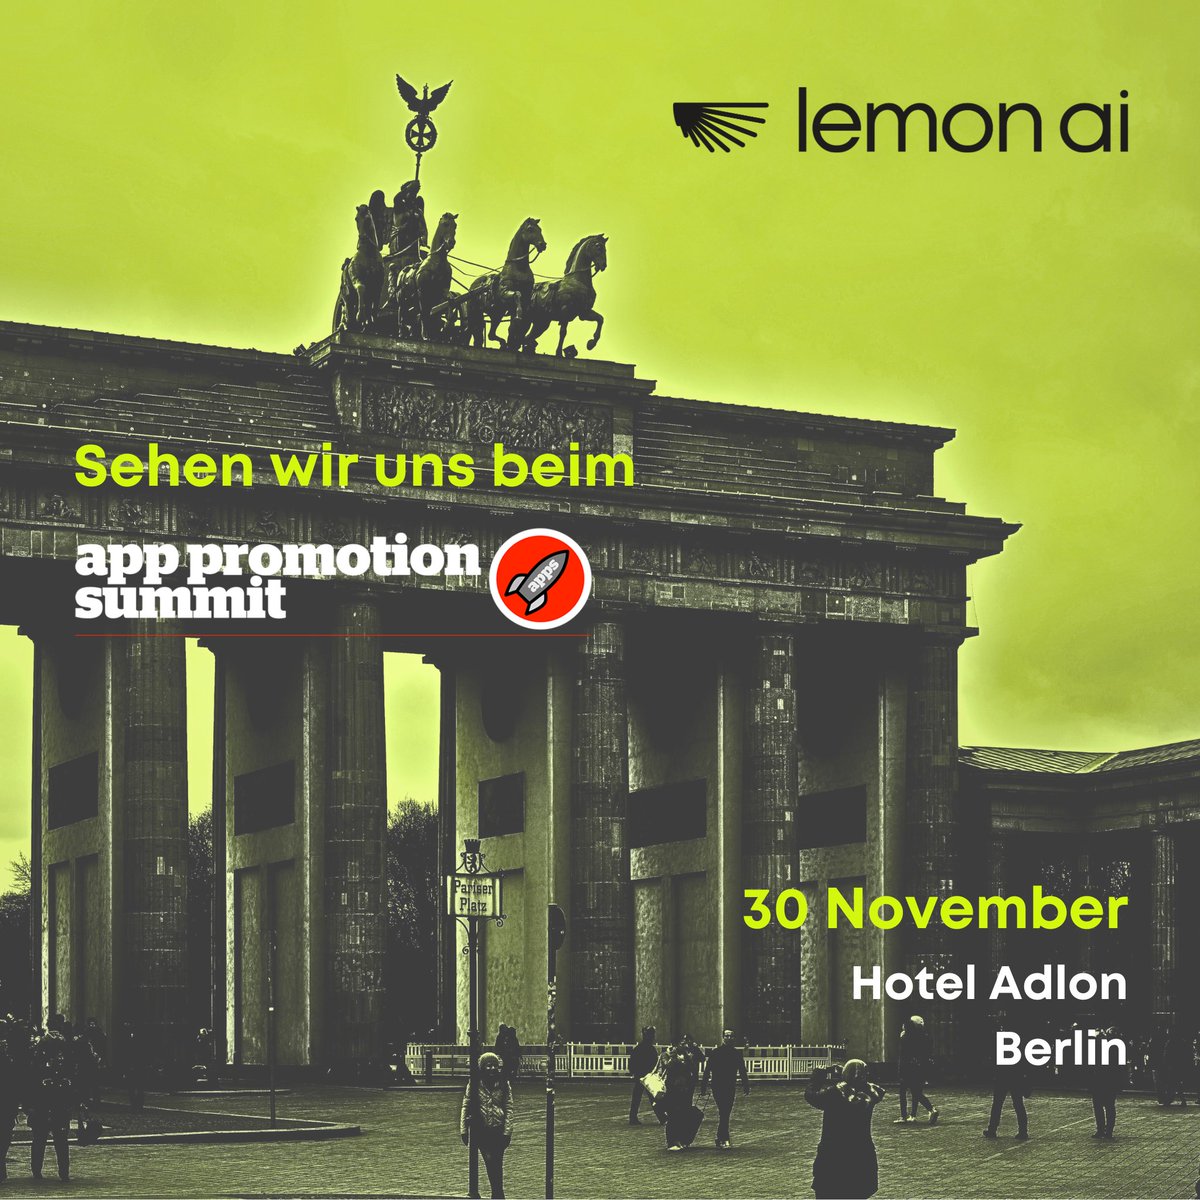 🥳 Lemon AI is thrilled to take part in #AppPromotionSummit!
😋This is the most app-etizing summit ever!
🍋Join us at Lemon AI’s stand and get a free 12-month plan!
😎See you at #APSBerlin